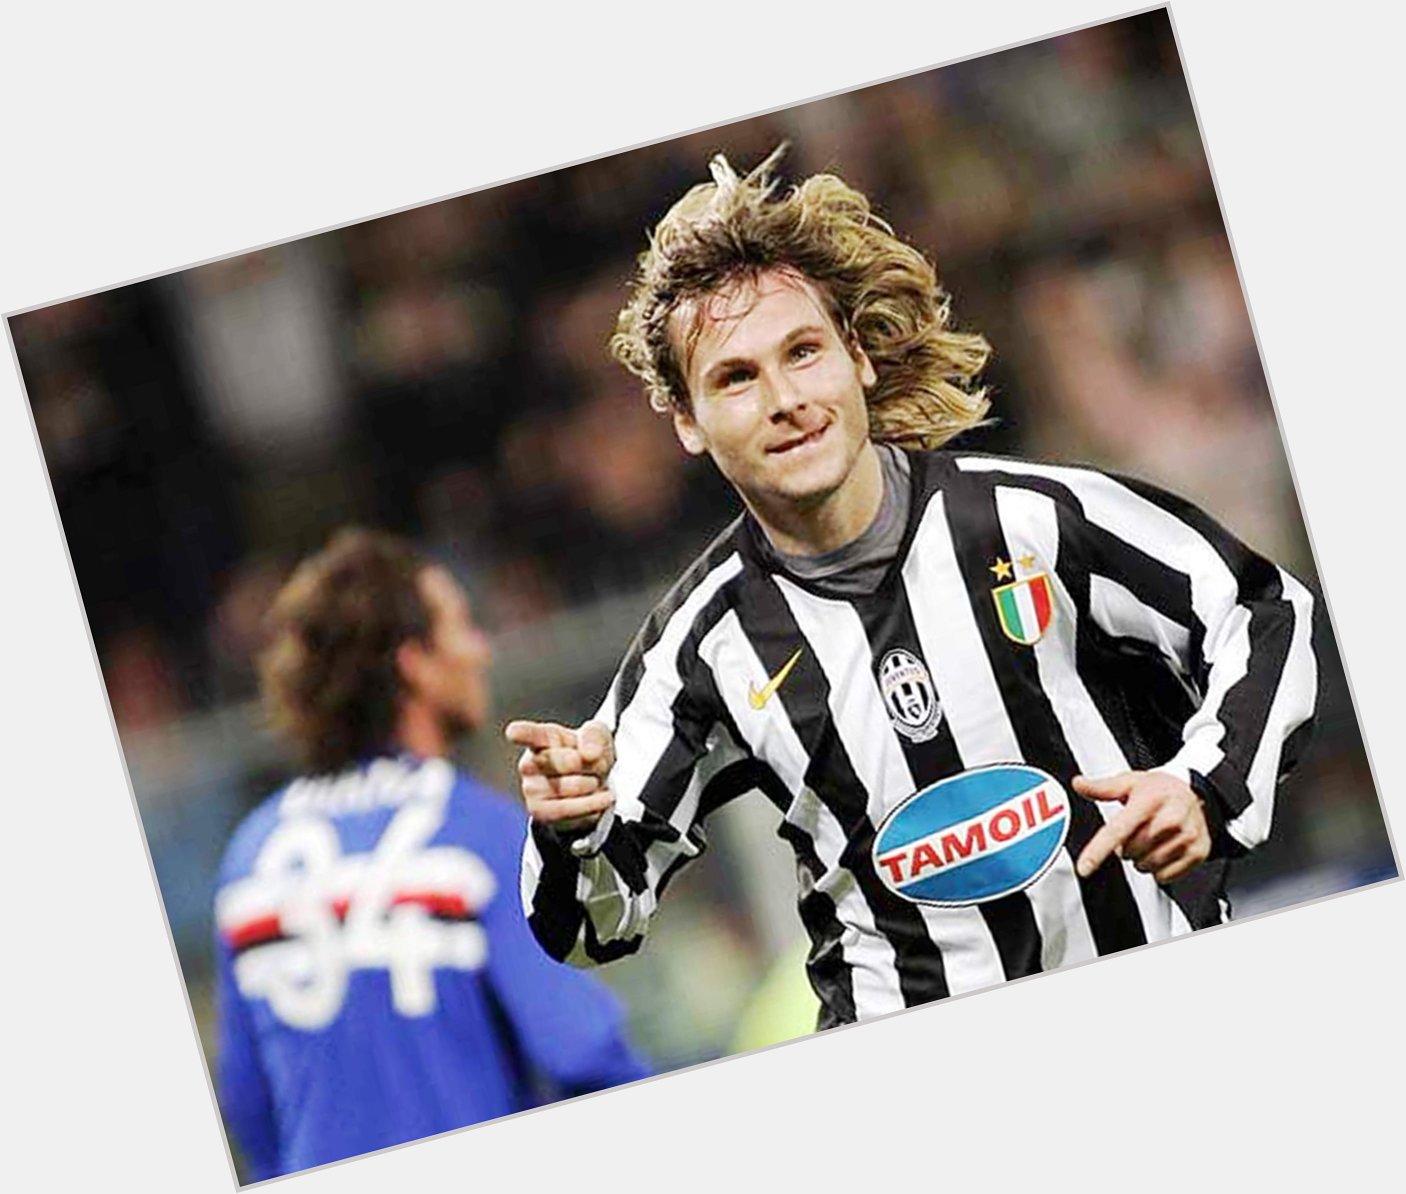 Happy 46th birthday to former Juventus and Czech Republic star Pavel Nedved. What a player he was in his prime 